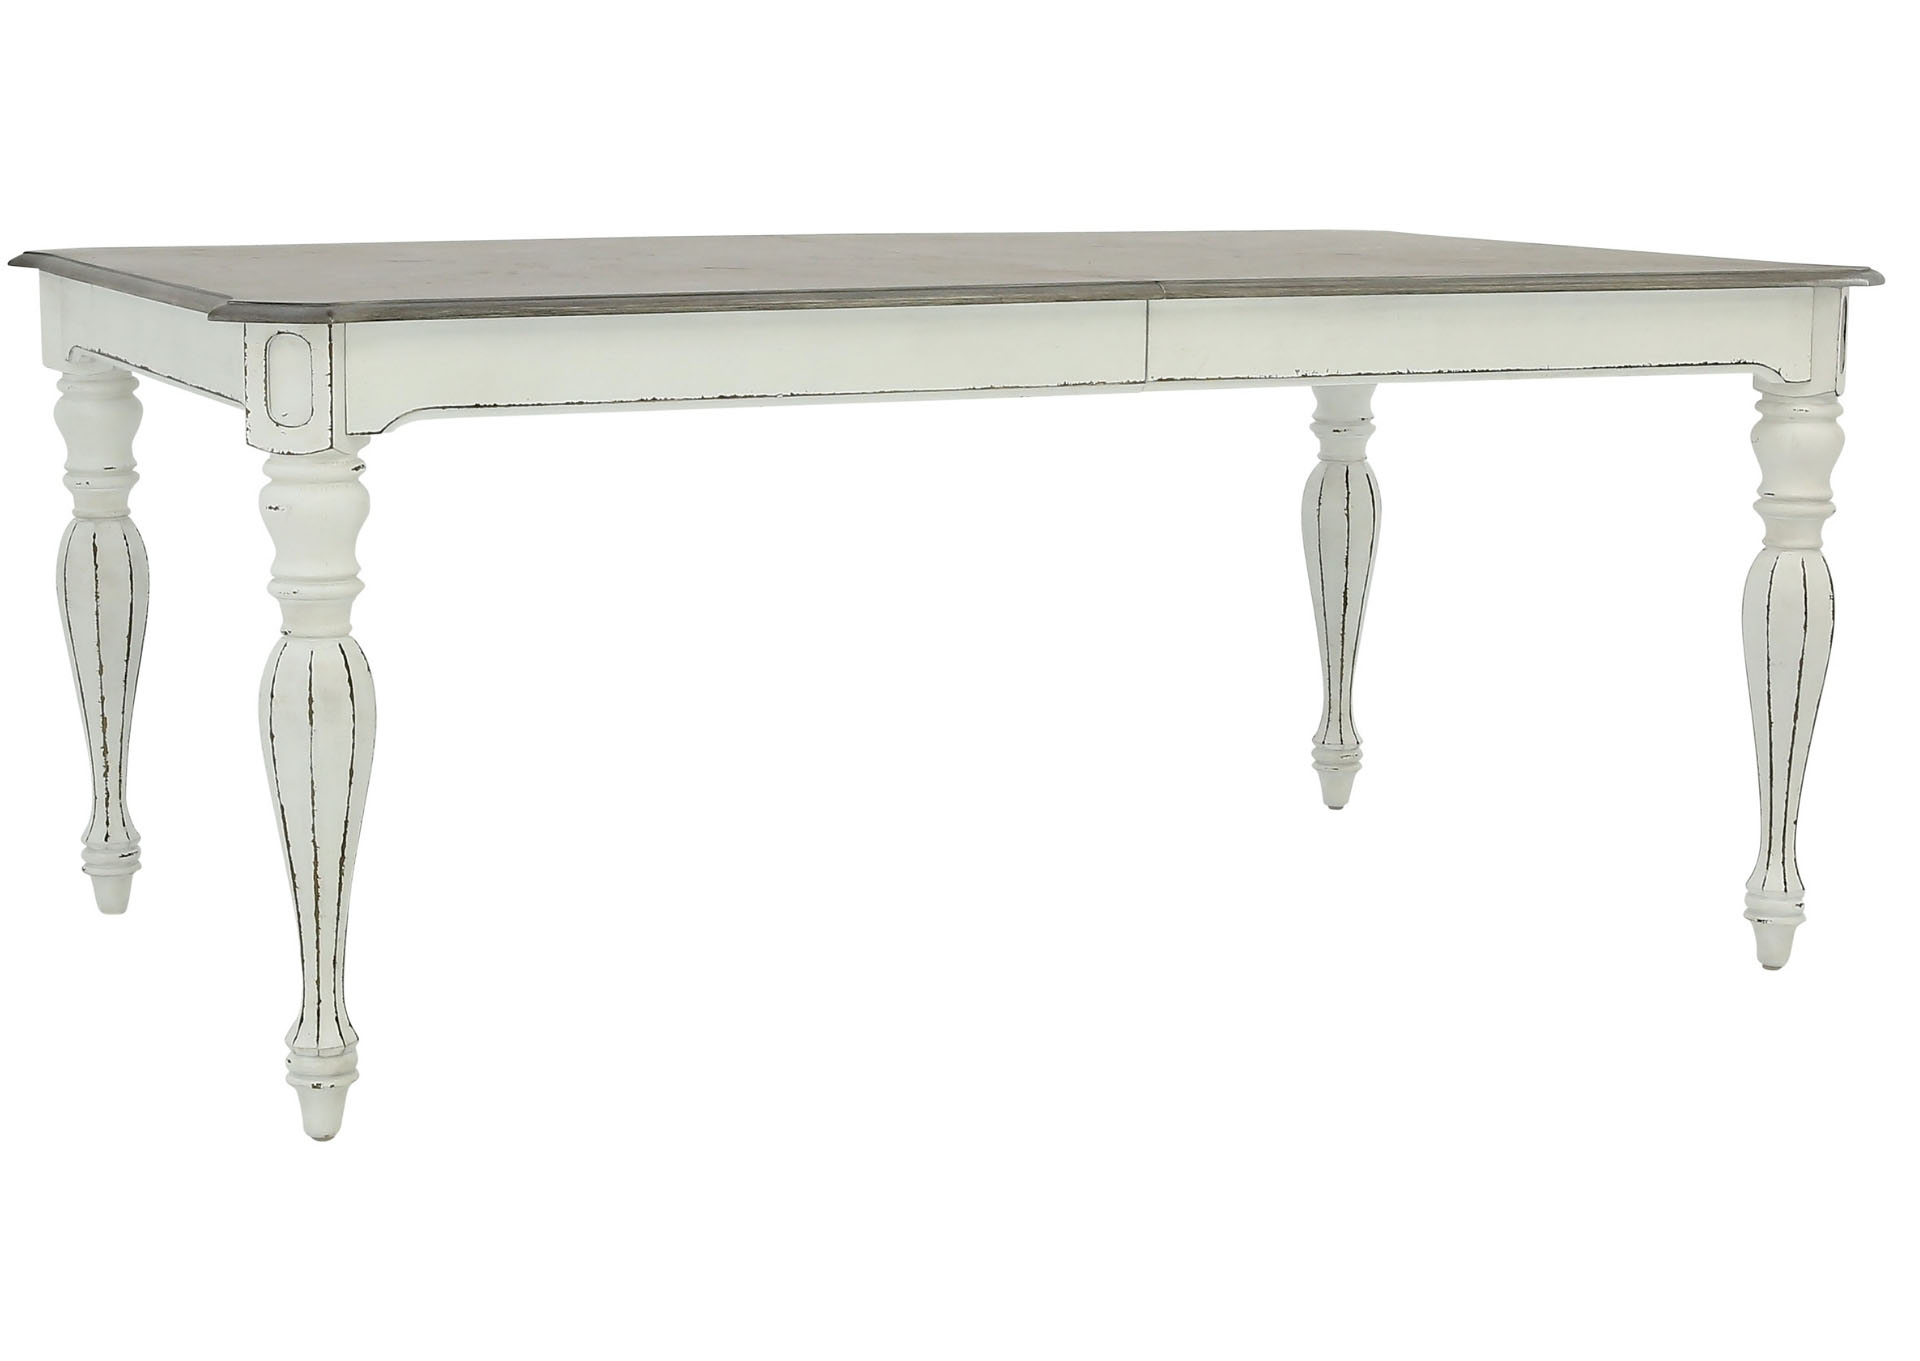 MAGNOLIA MANOR DINING TABLE WITH LEAF,LIBERTY FURNITURE